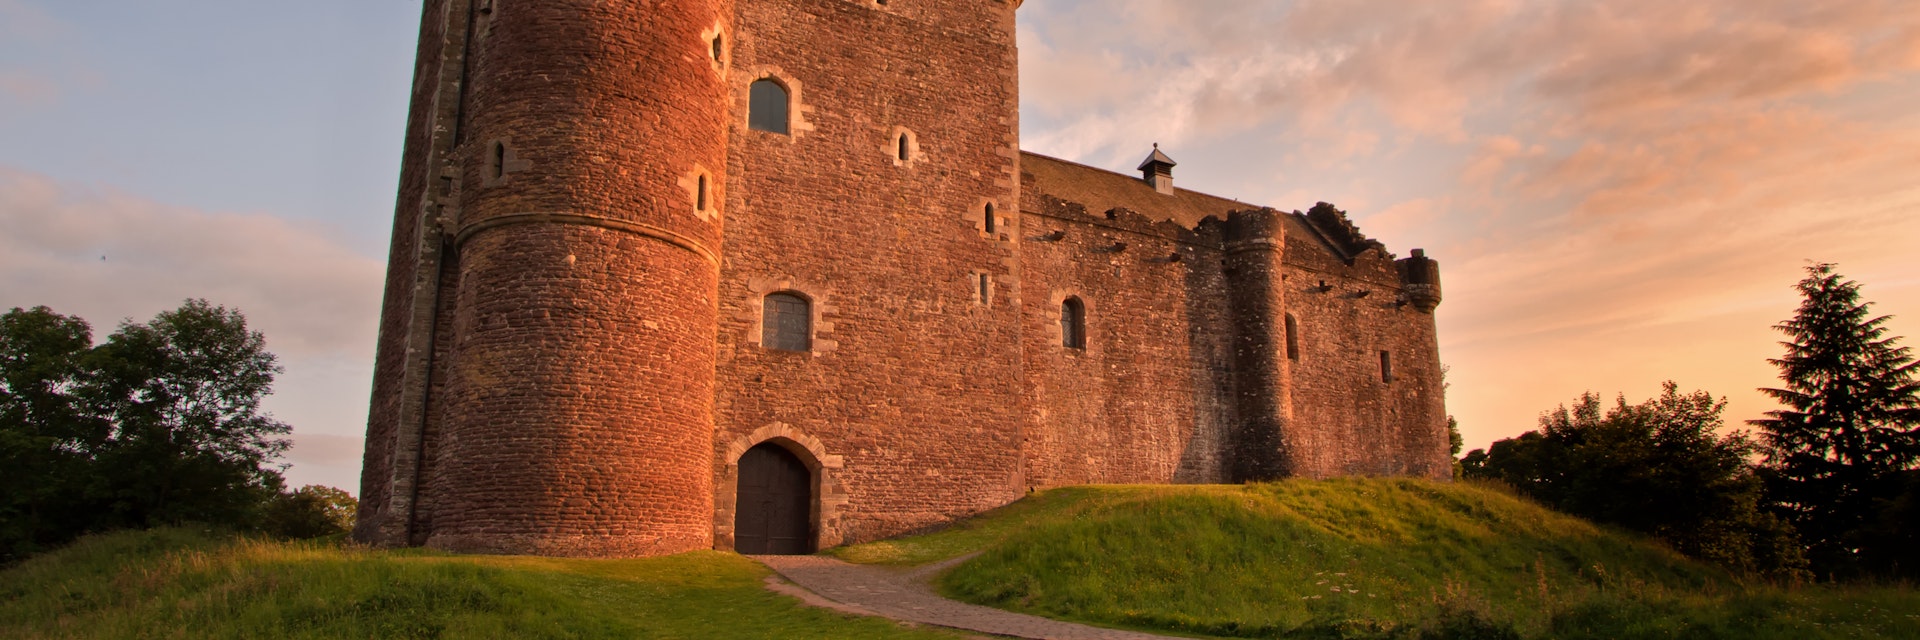 A medieval courtyard fortress built around 1400 by Robert Stewart, Duke of Albany, the Scottish Regent.
642231280
Stirlingshire, building, fortress, stronghold, culture, scene, scenery, scenic